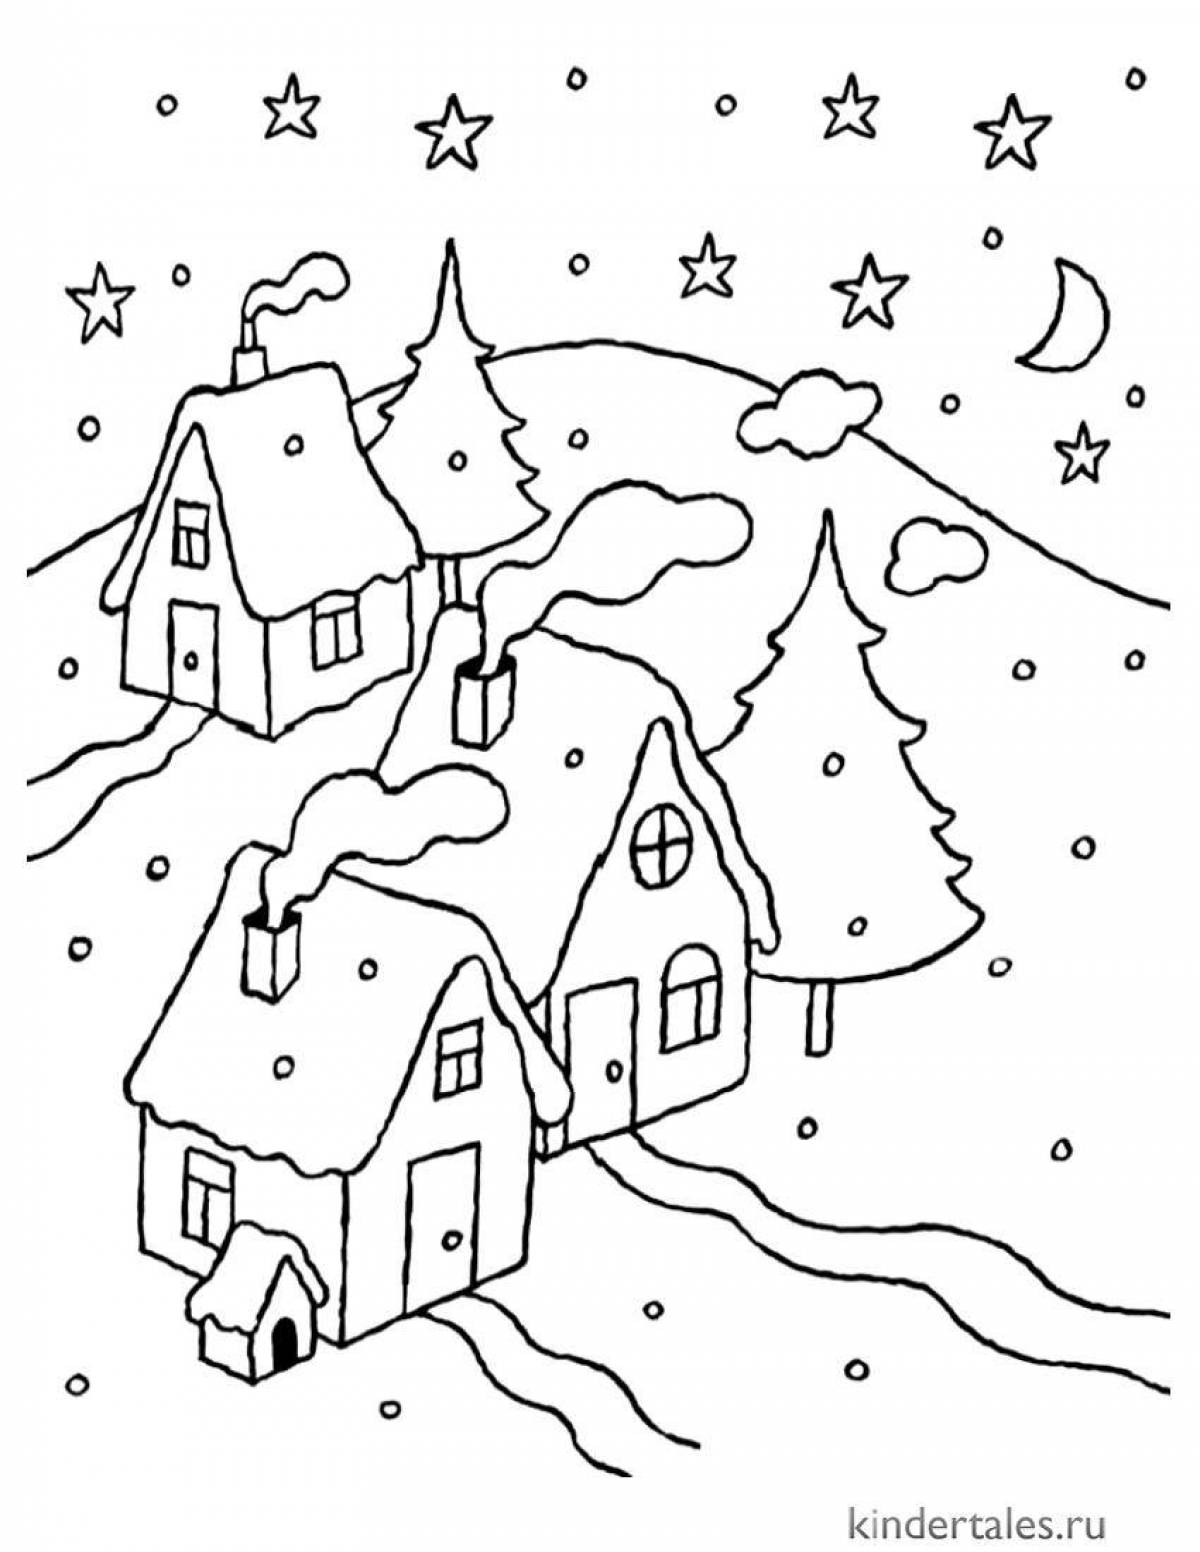 Dreamy coloring picture of a winter evening